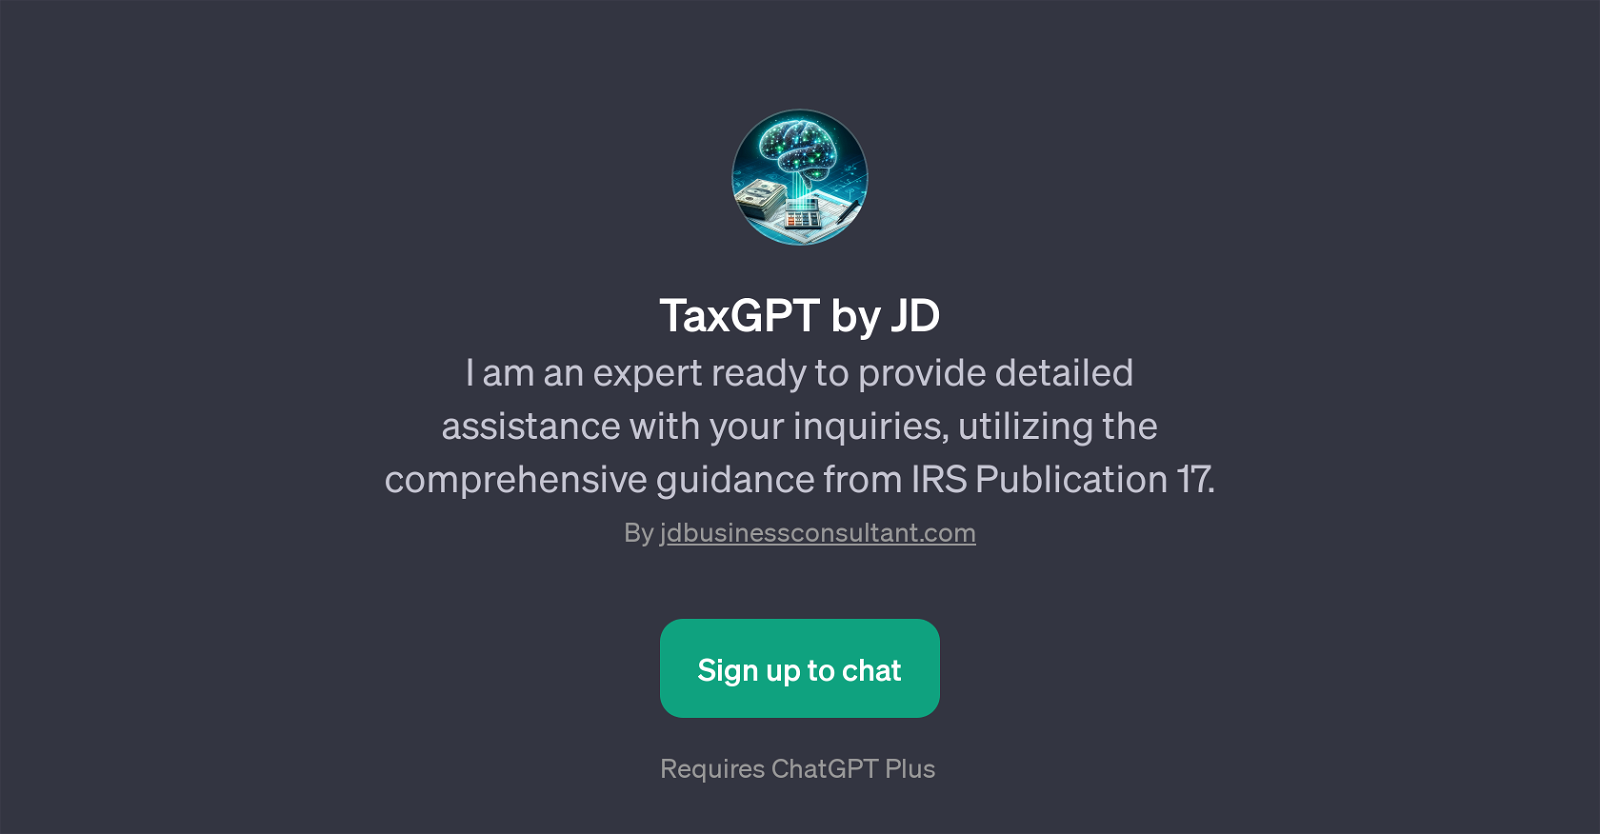 TaxGPT by JD website